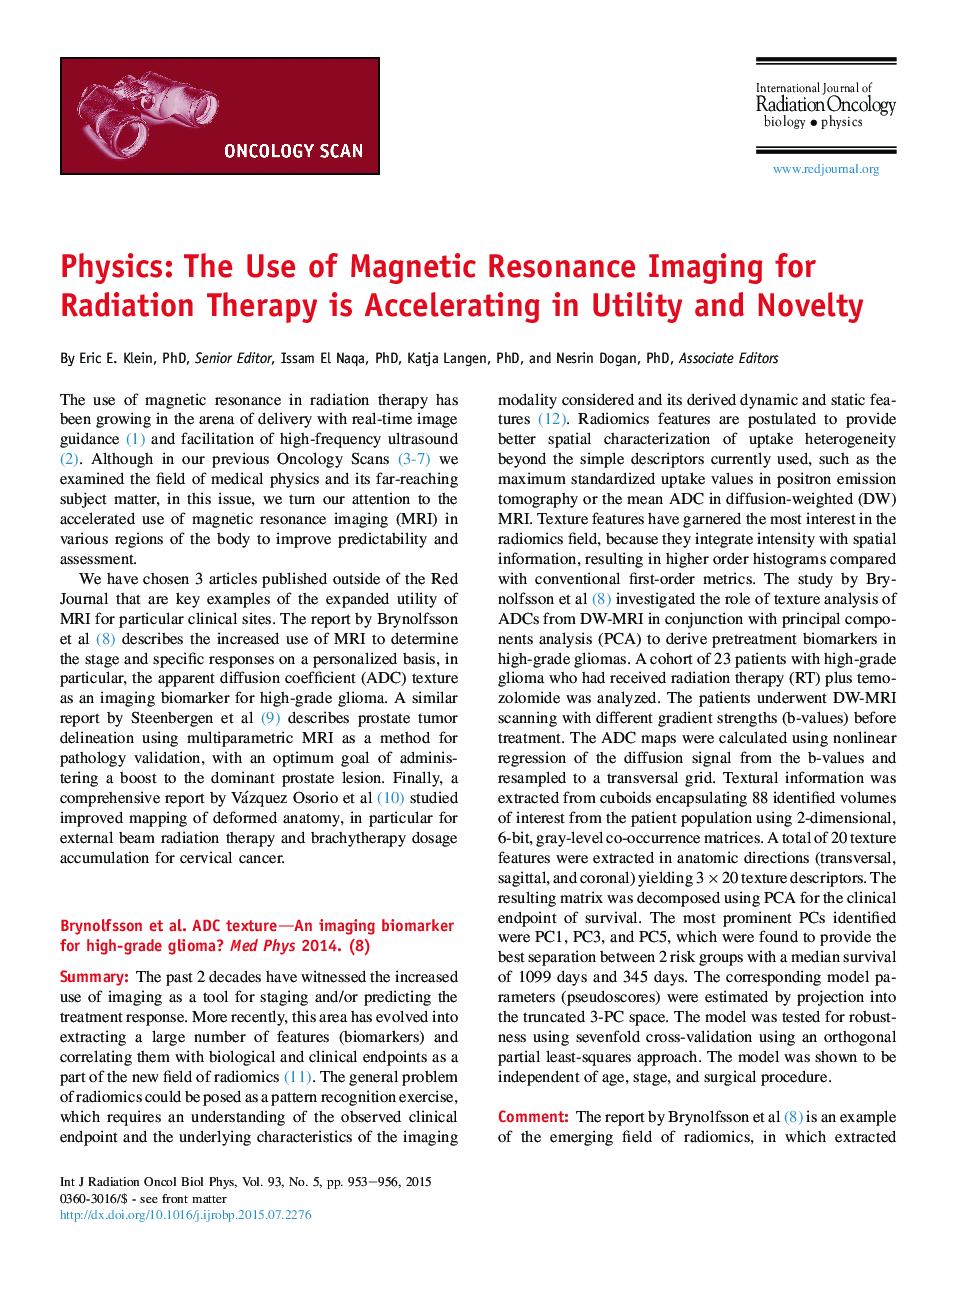 Physics: The Use of Magnetic Resonance Imaging for Radiation Therapy is Accelerating in Utility and Novelty